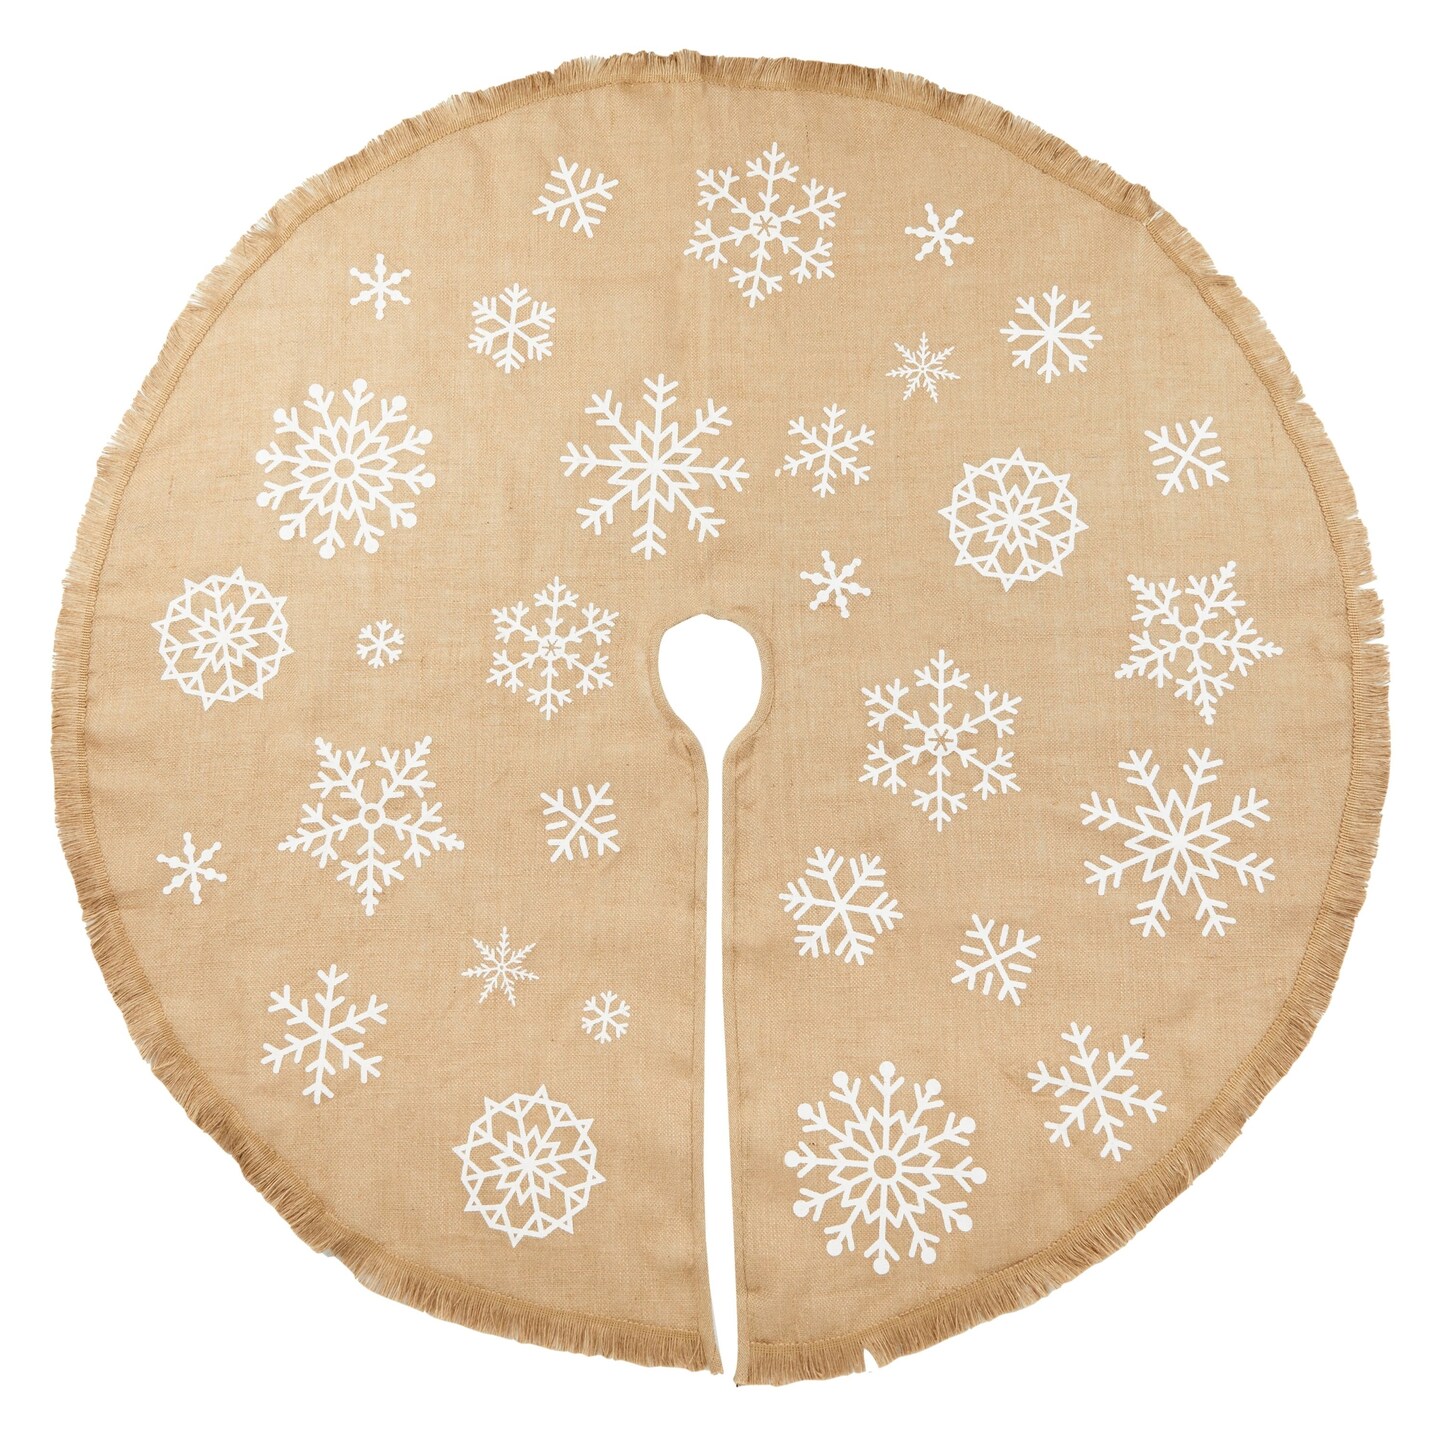 60 Inch Burlap Christmas Tree Skirt, Rustic Snowflake Holiday Decorations for Home